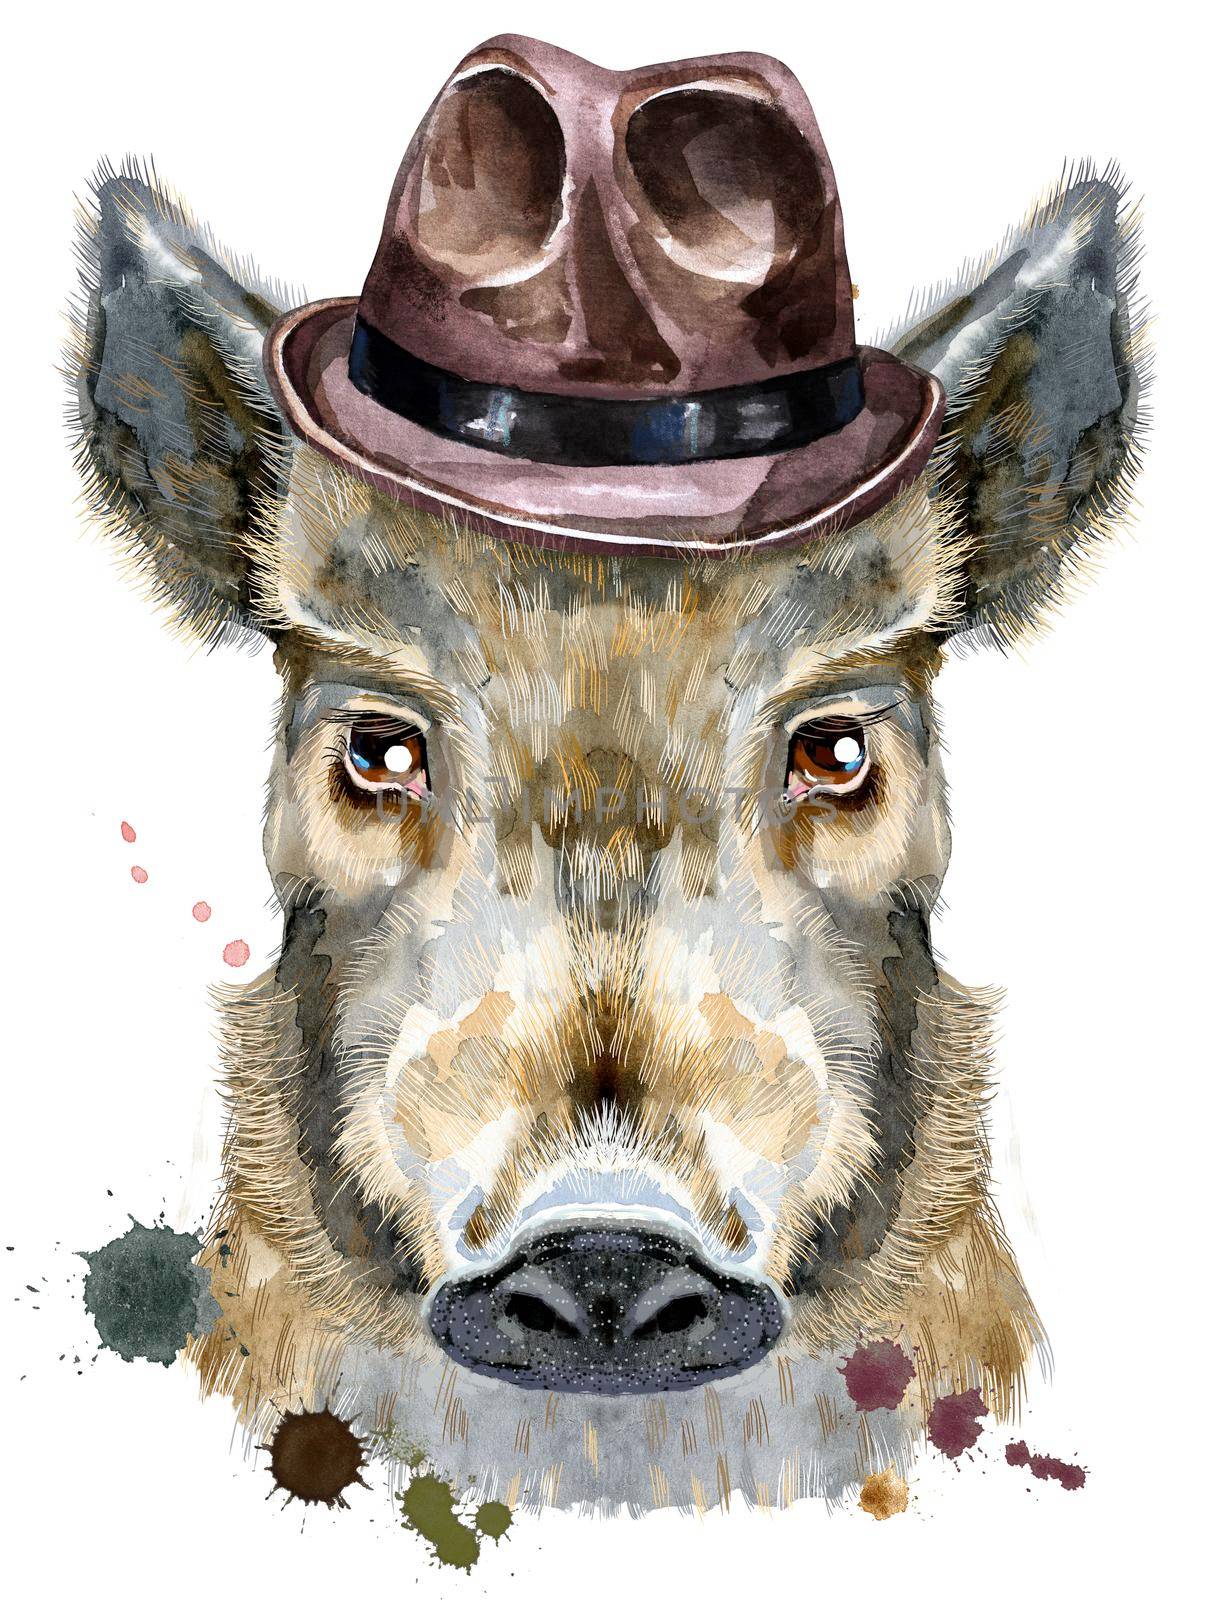 Cute piggy green hat. Wild boar for T-shirt graphics. Watercolor brown boar illustration